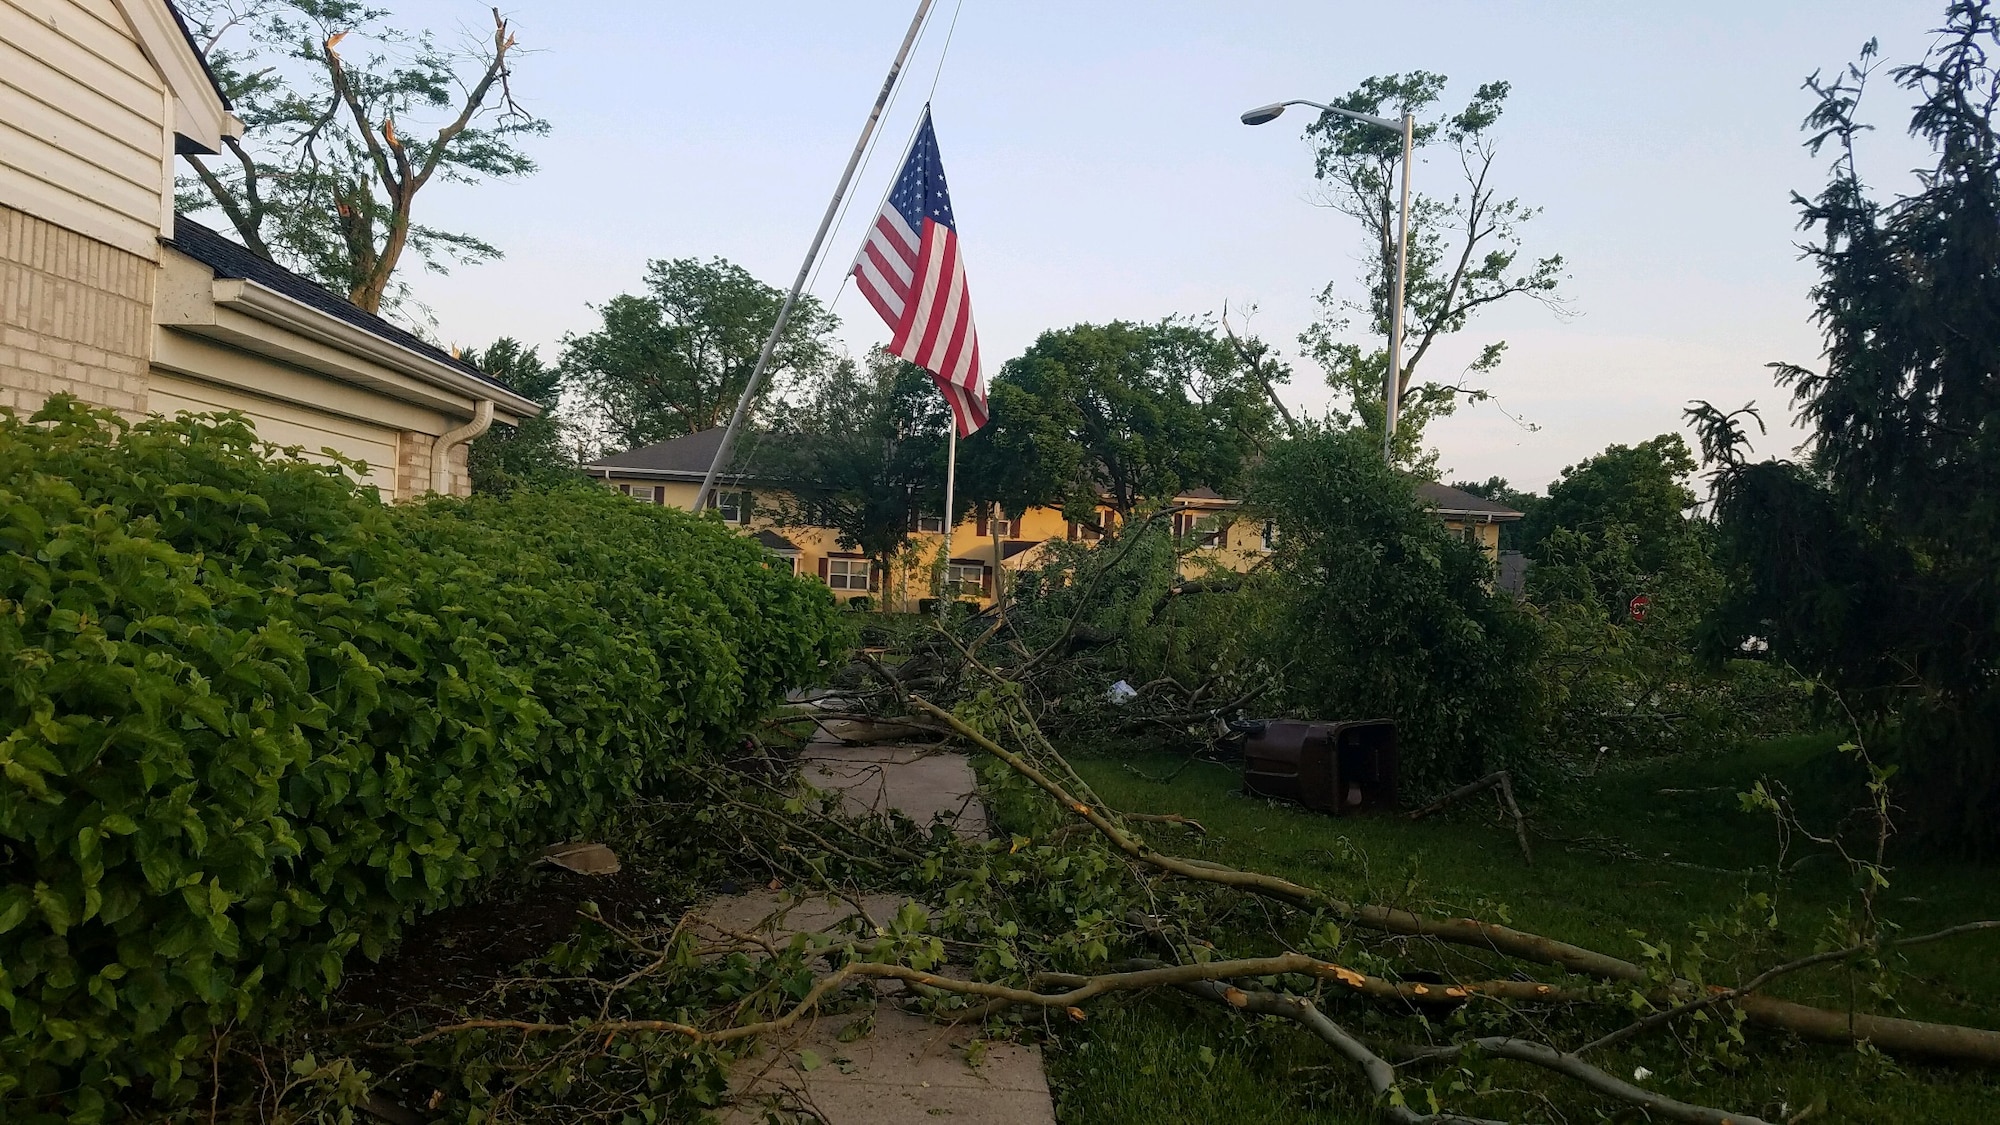 Approximately 150 homes in the Prairies at Wright Field housing area were damaged, some significantly, during the storm that passed through the Dayton area late on May 27.